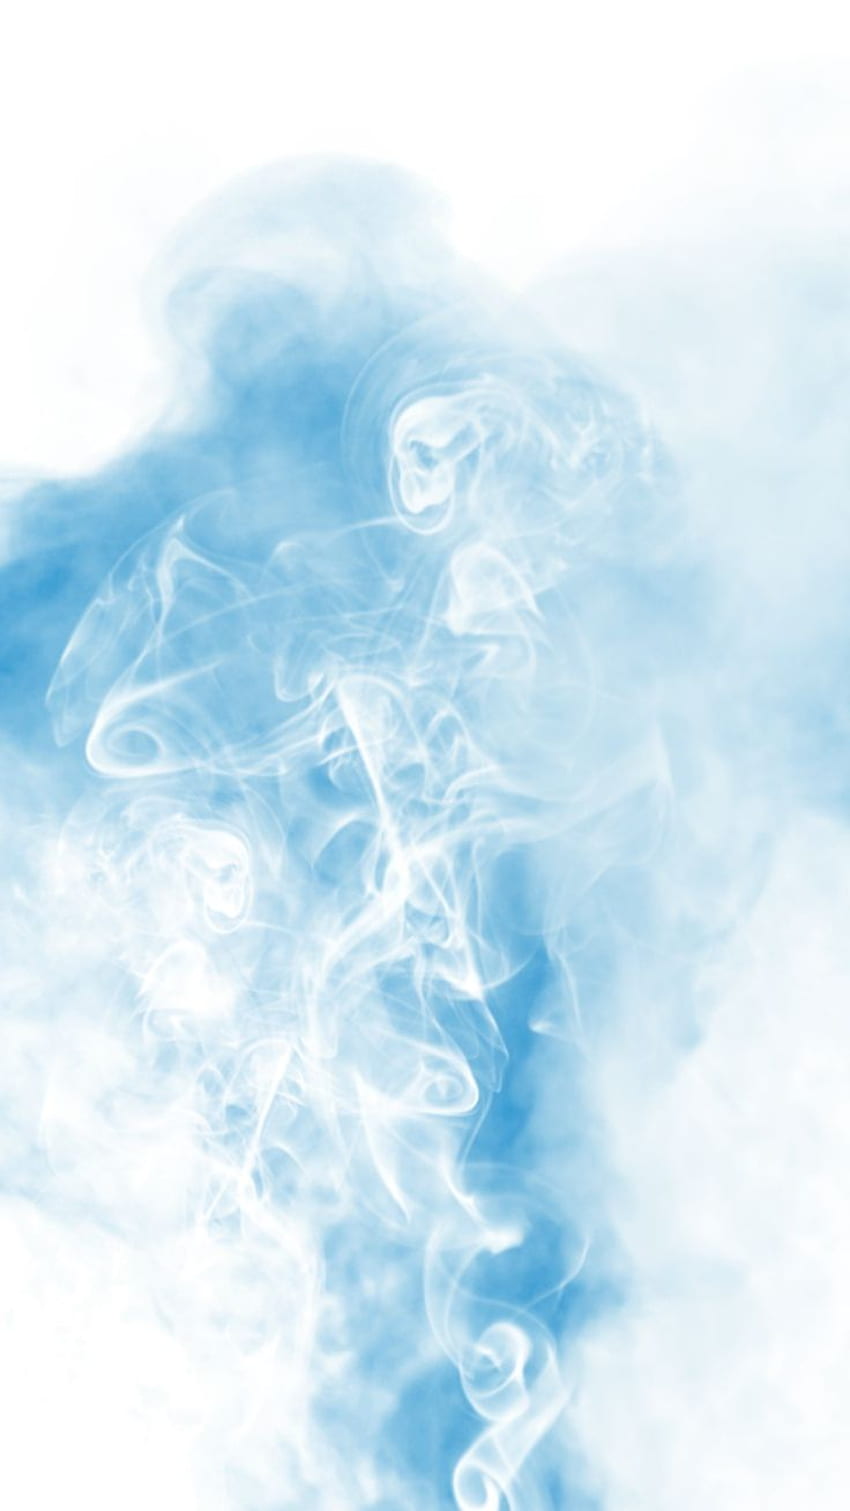 Blue Smoke Background Images HD Pictures and Wallpaper For Free Download   Pngtree